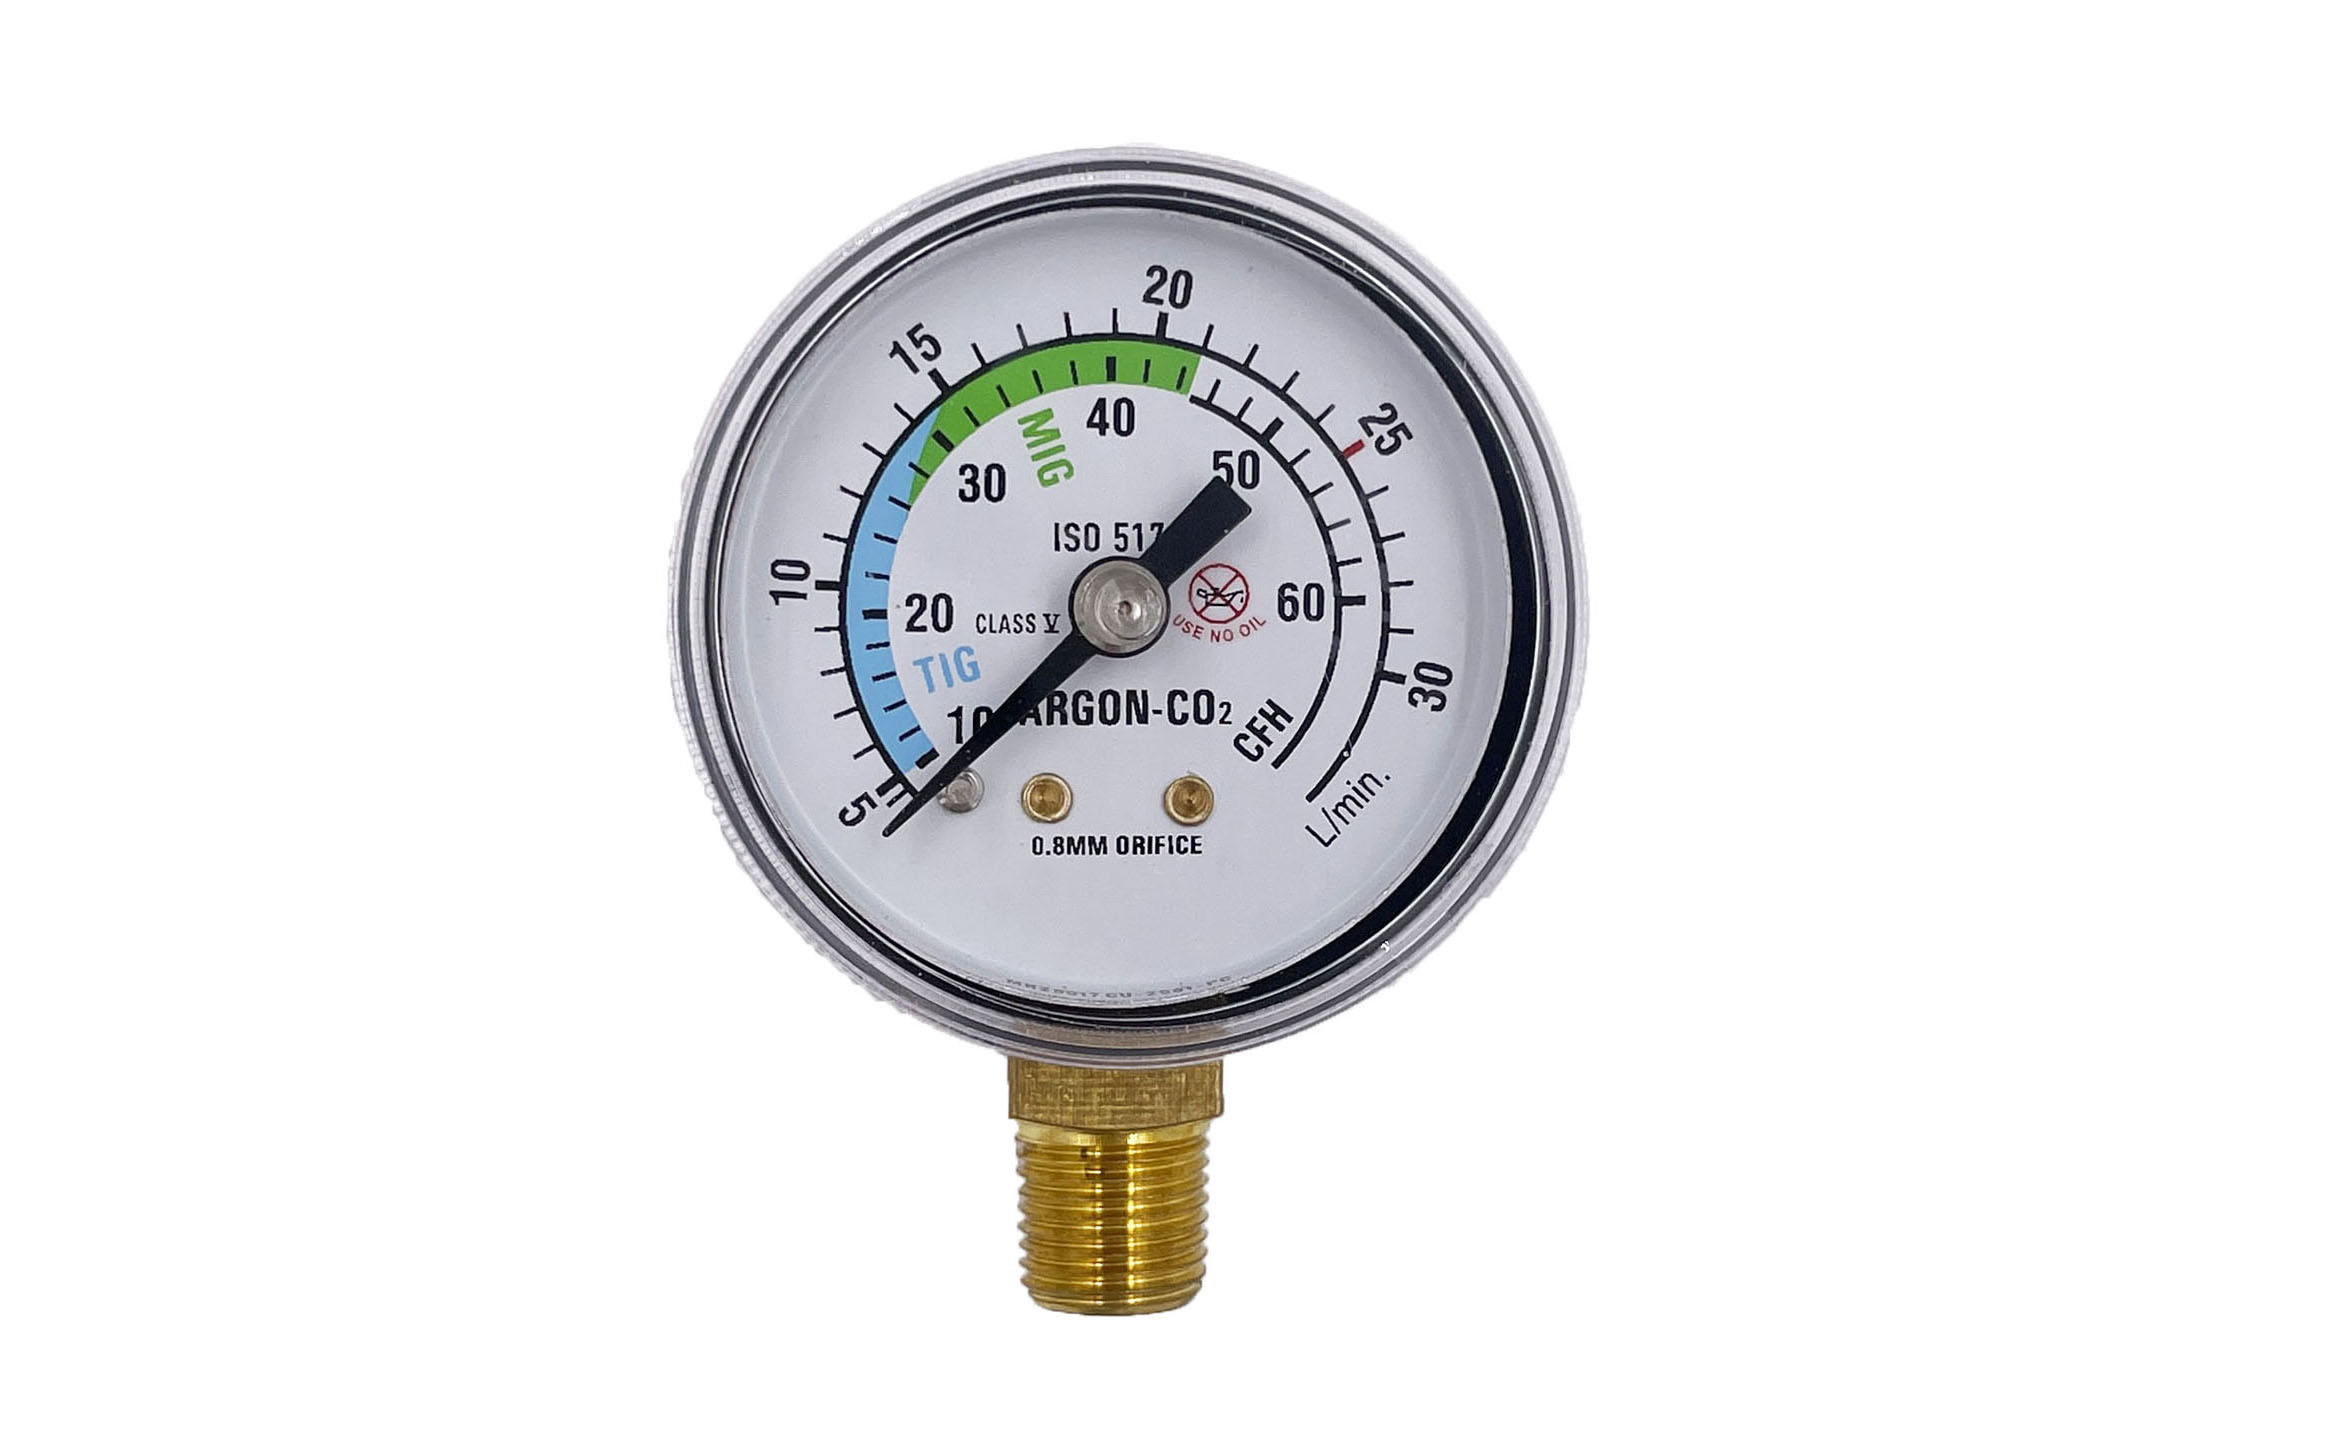 Boston a company bought a batch of pressure gauges